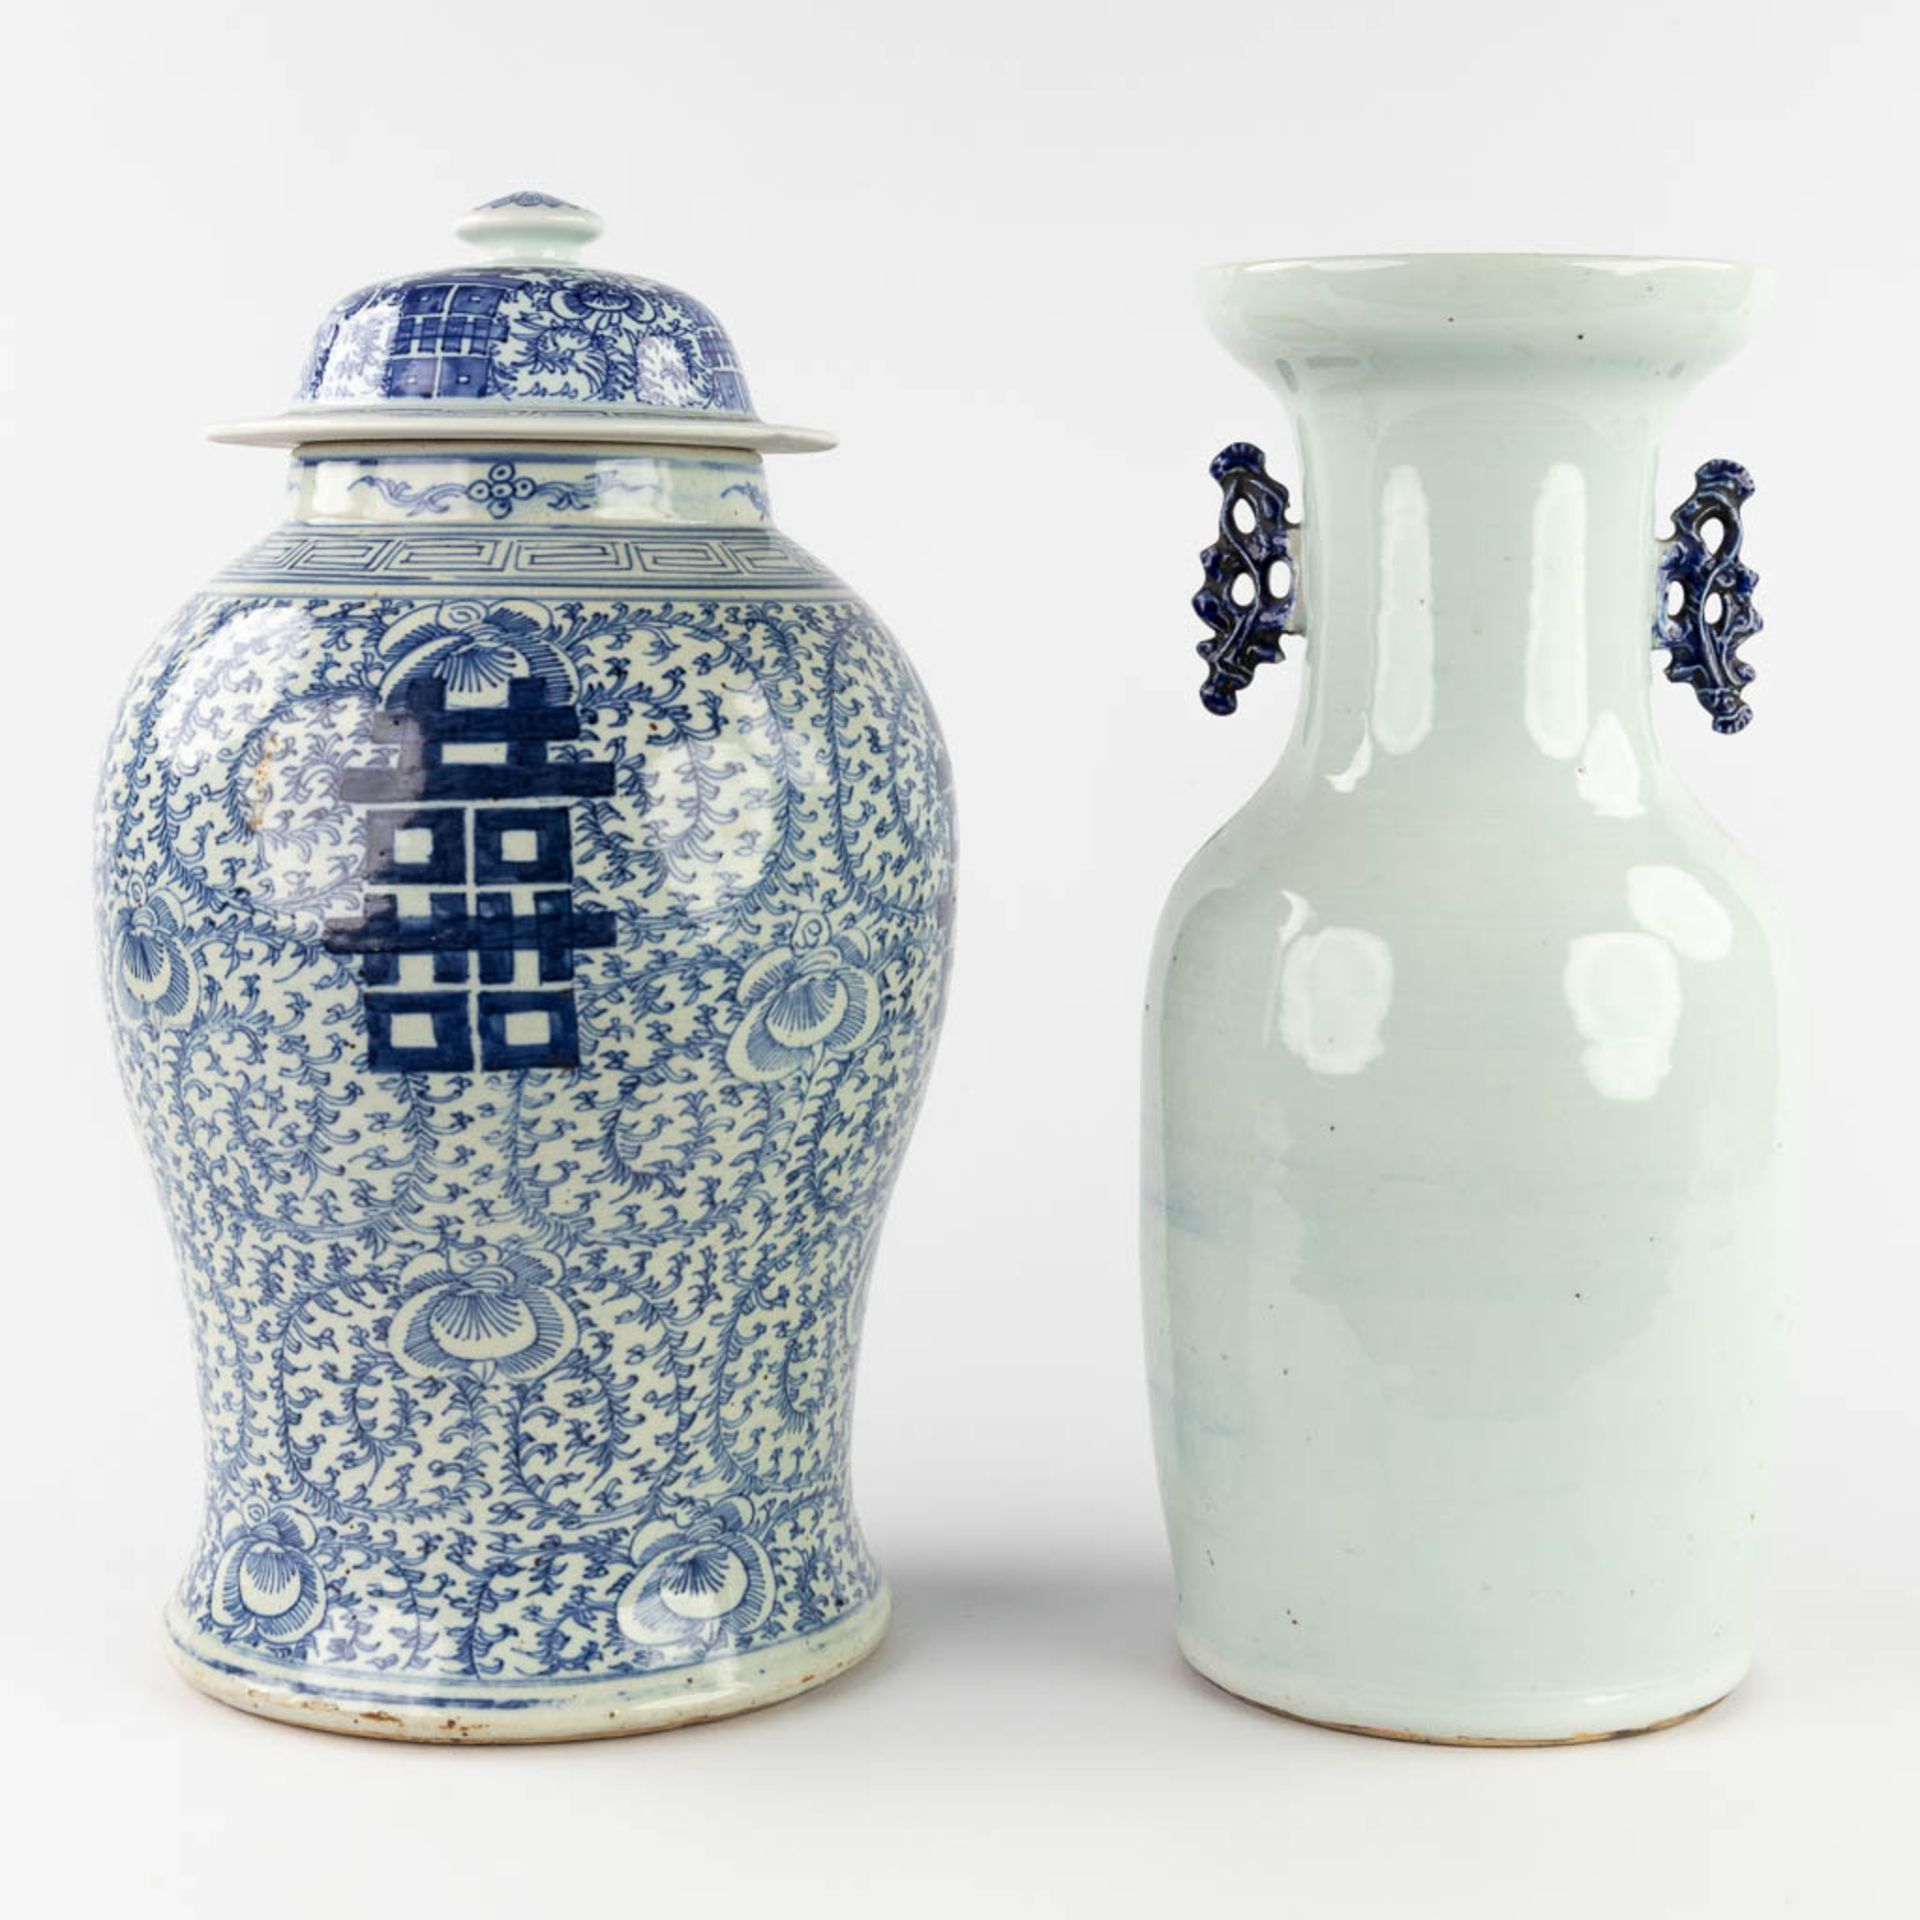 Two Chinese vases, of which one with a lid. Blue-white decor. 19th/20th C. (H:45 x D:25 cm) - Image 5 of 13